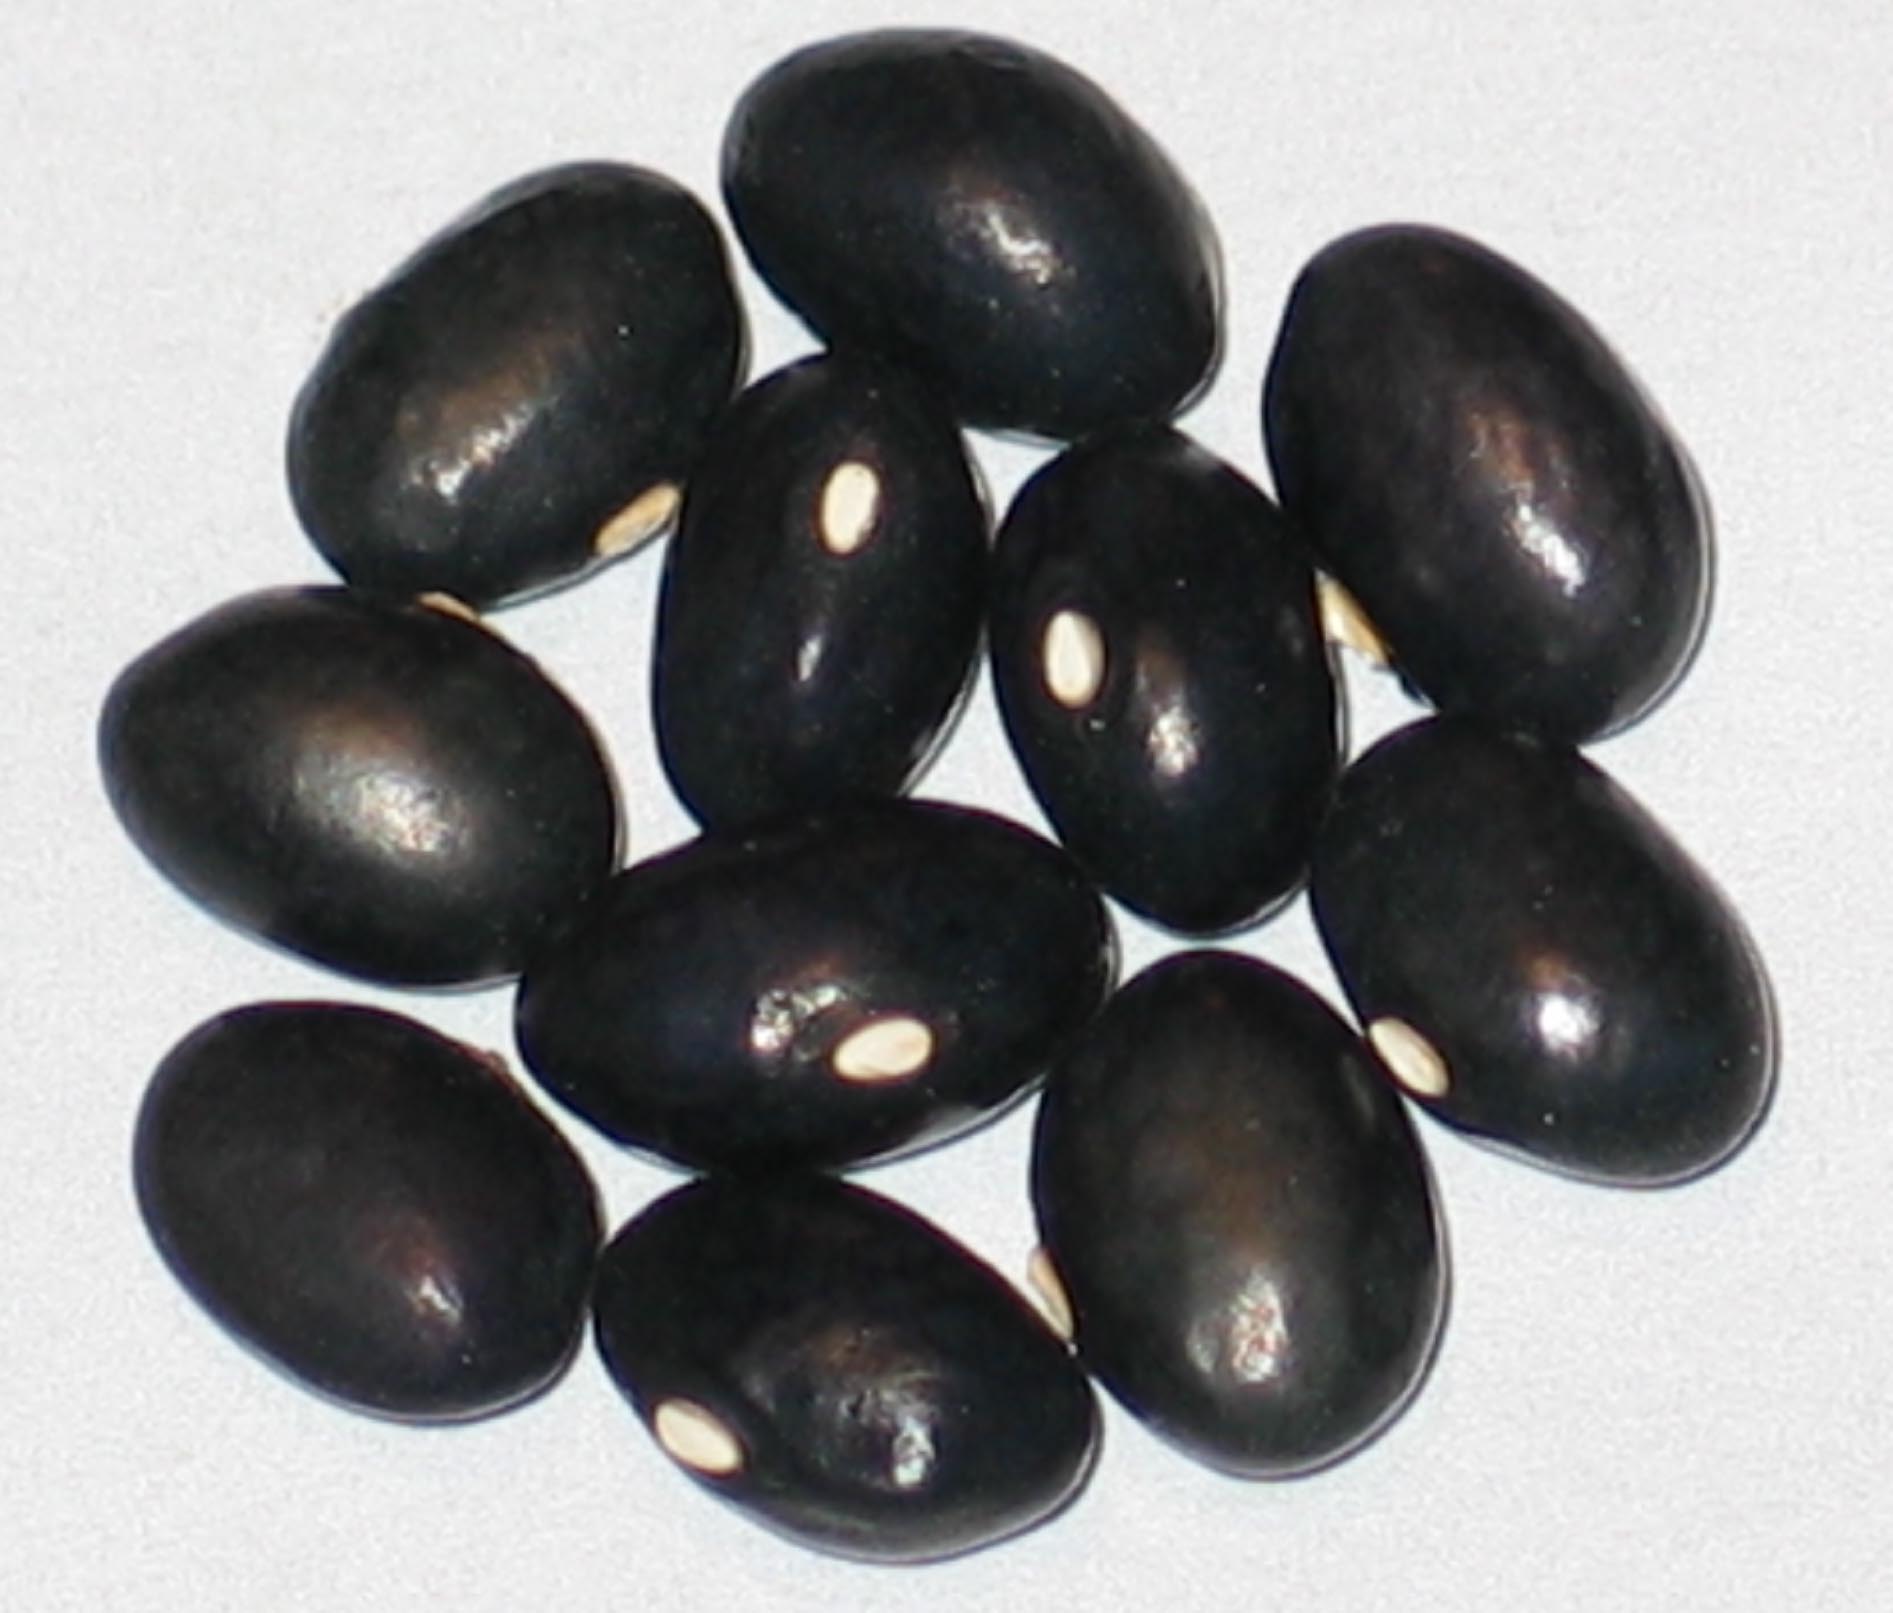 image of Black Horse beans